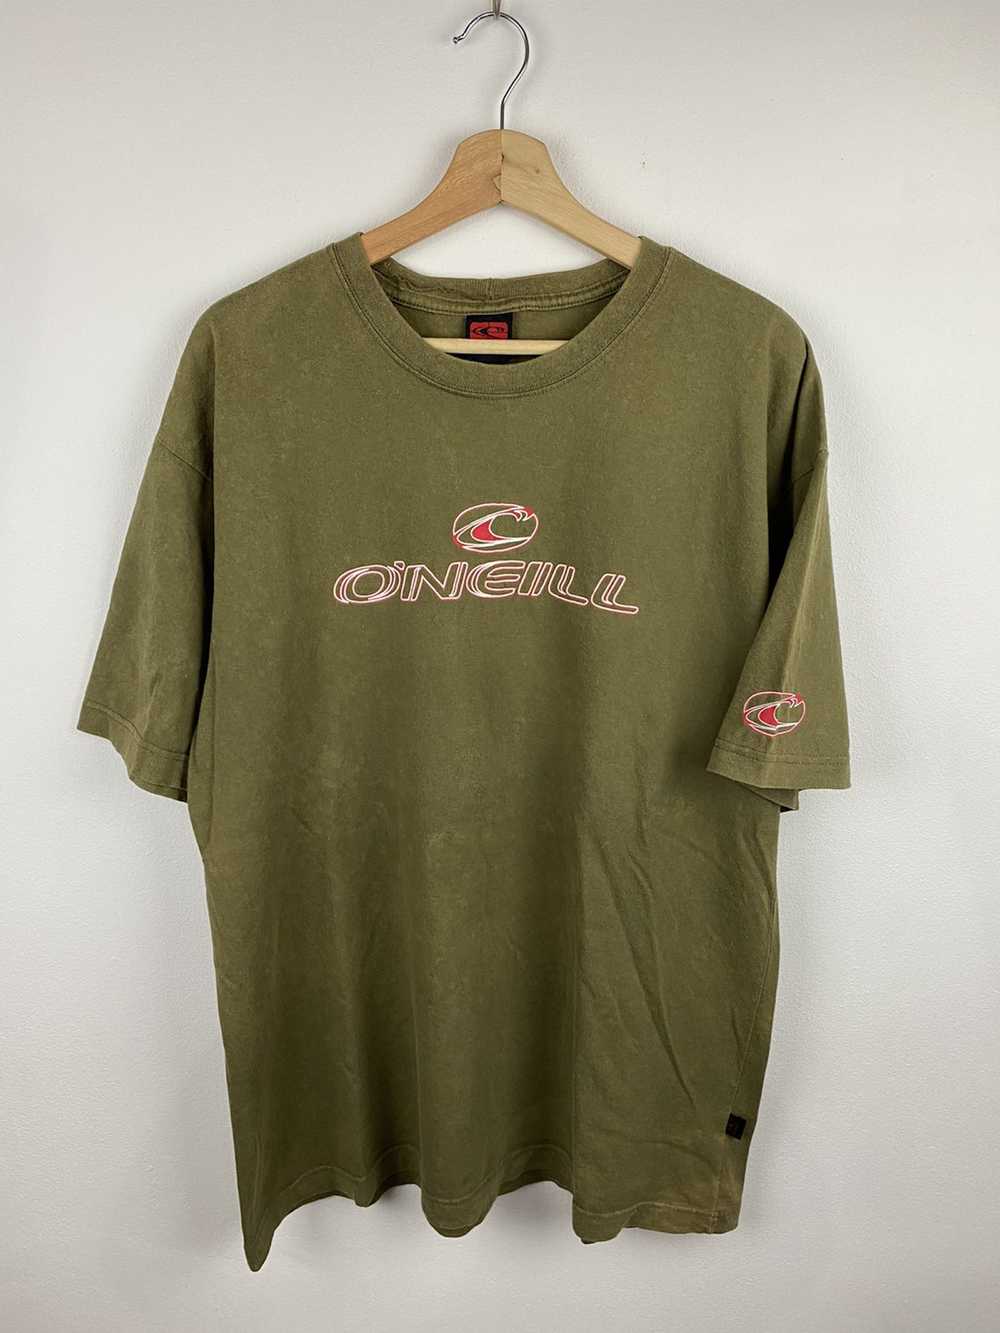 Oneill × Surf Style × Vintage Vintage Oneill Surf - image 1